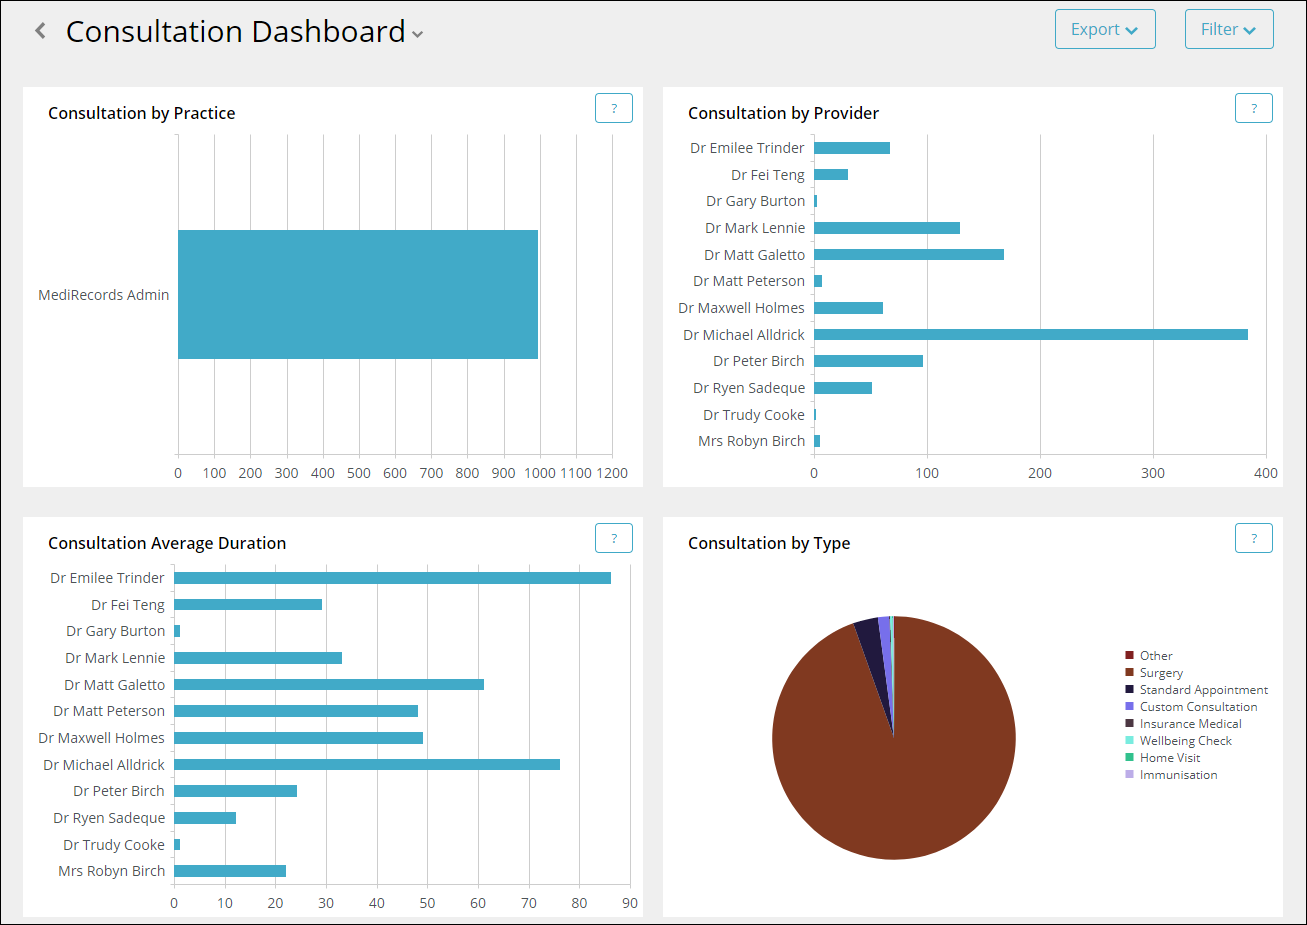 consultation_dashboard_filter_example_result.png